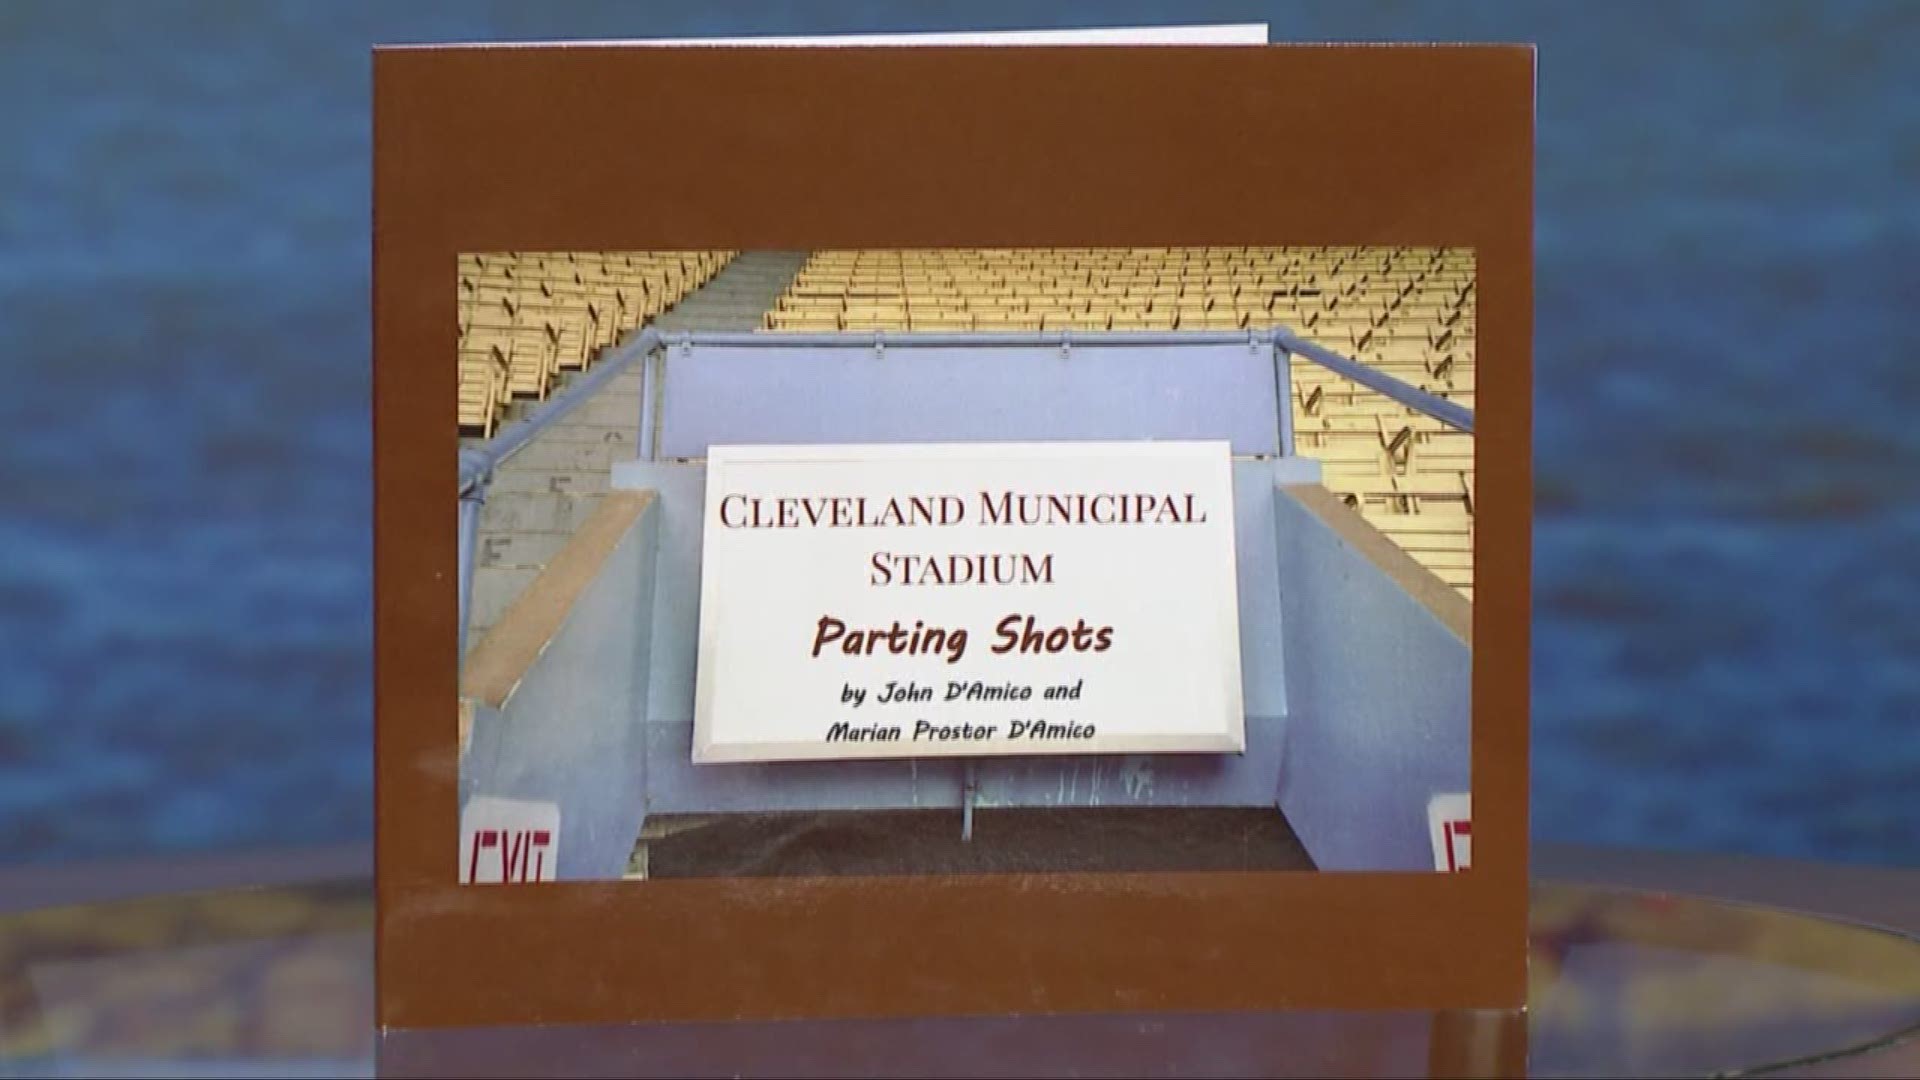 Jimmy introduces us to a couple who gave him a very special gift, documenting the old days at the Browns' Municipal Stadium.